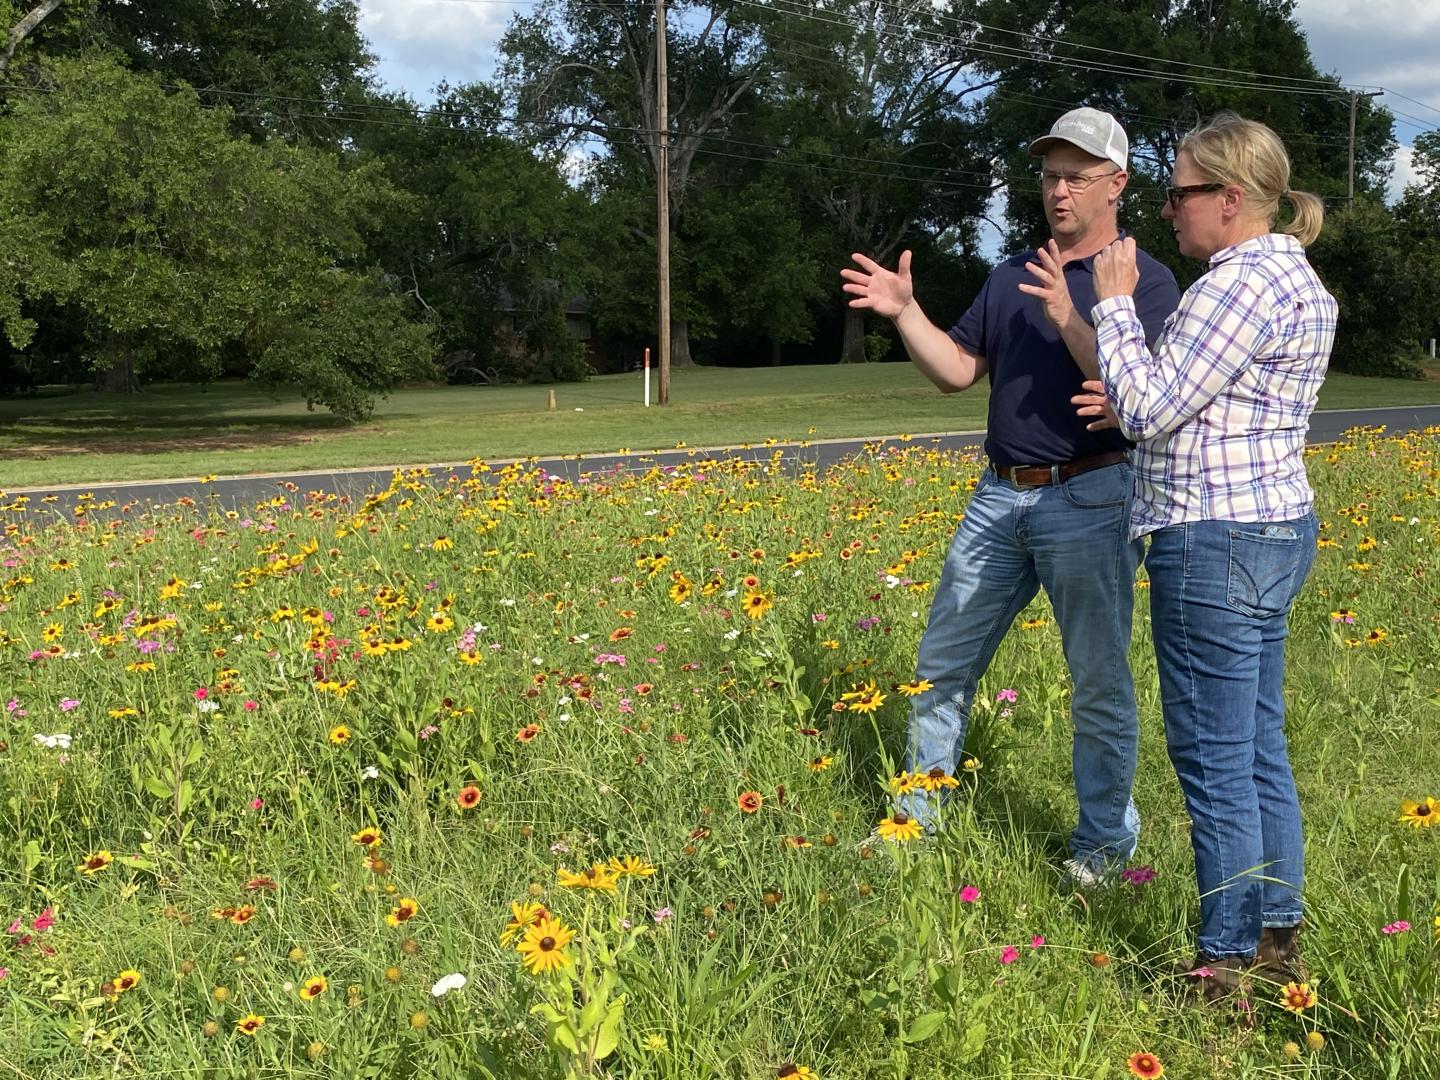 State Resource Conservationist Charles Kneuper and the East Texas PMC Agronomist Dawn Stover discuss how the planting is going in Nacogdoches, Texas.